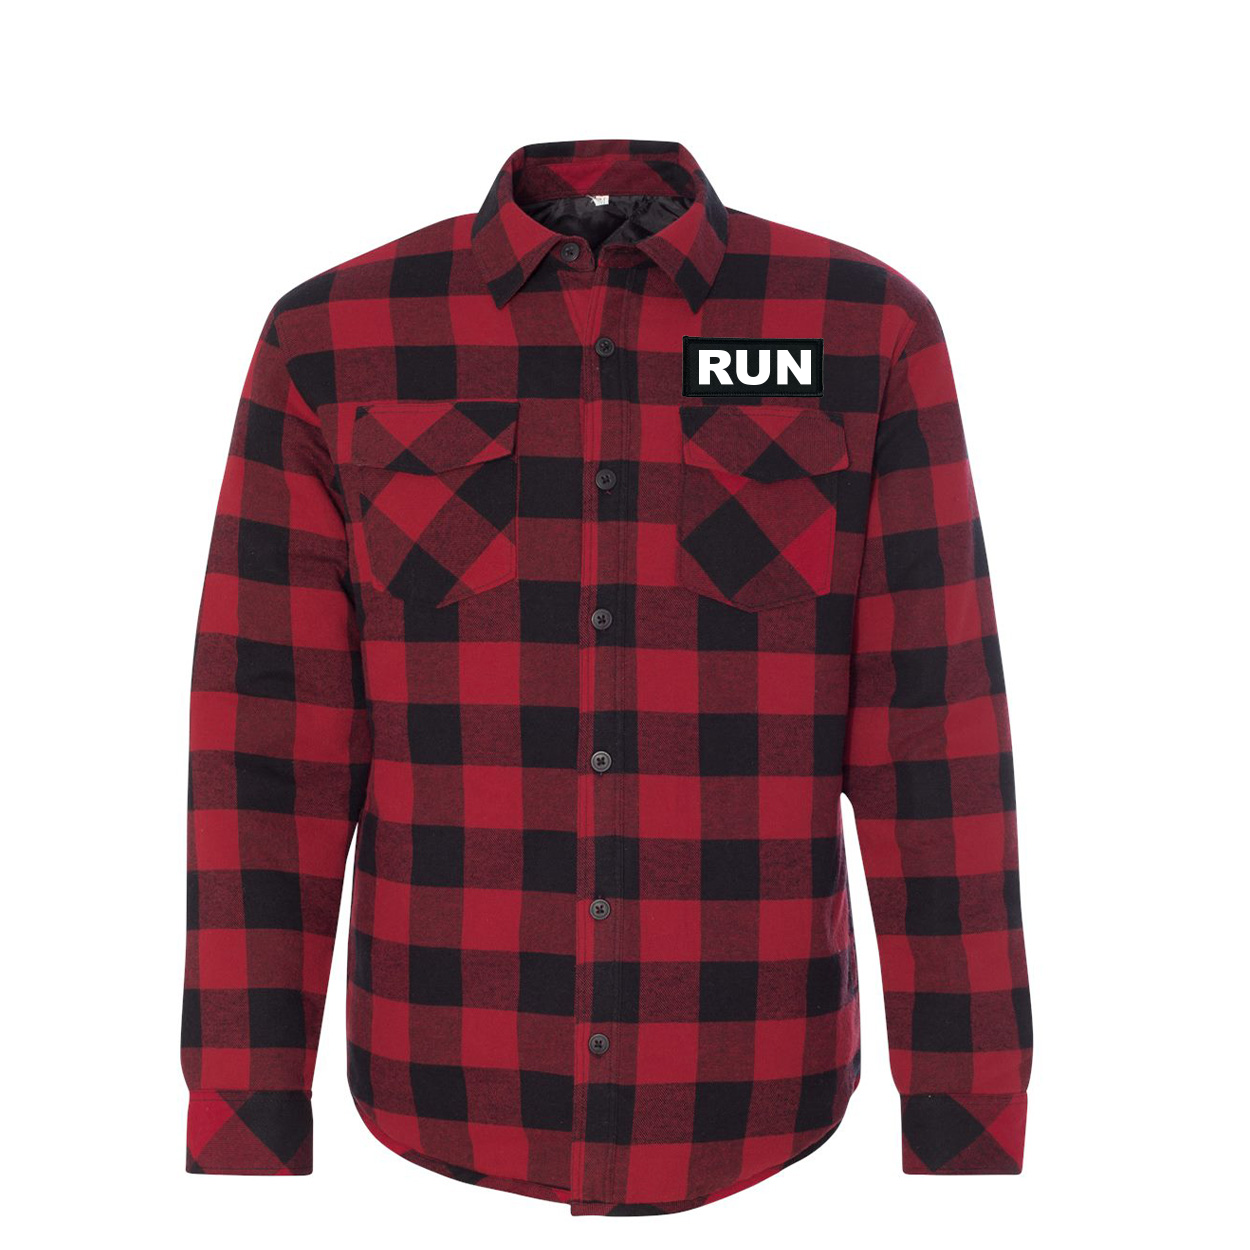 Run Brand Logo Classic Unisex Woven Patch Quilted Button Flannel Jacket Red/Black Buffalo (White Logo)